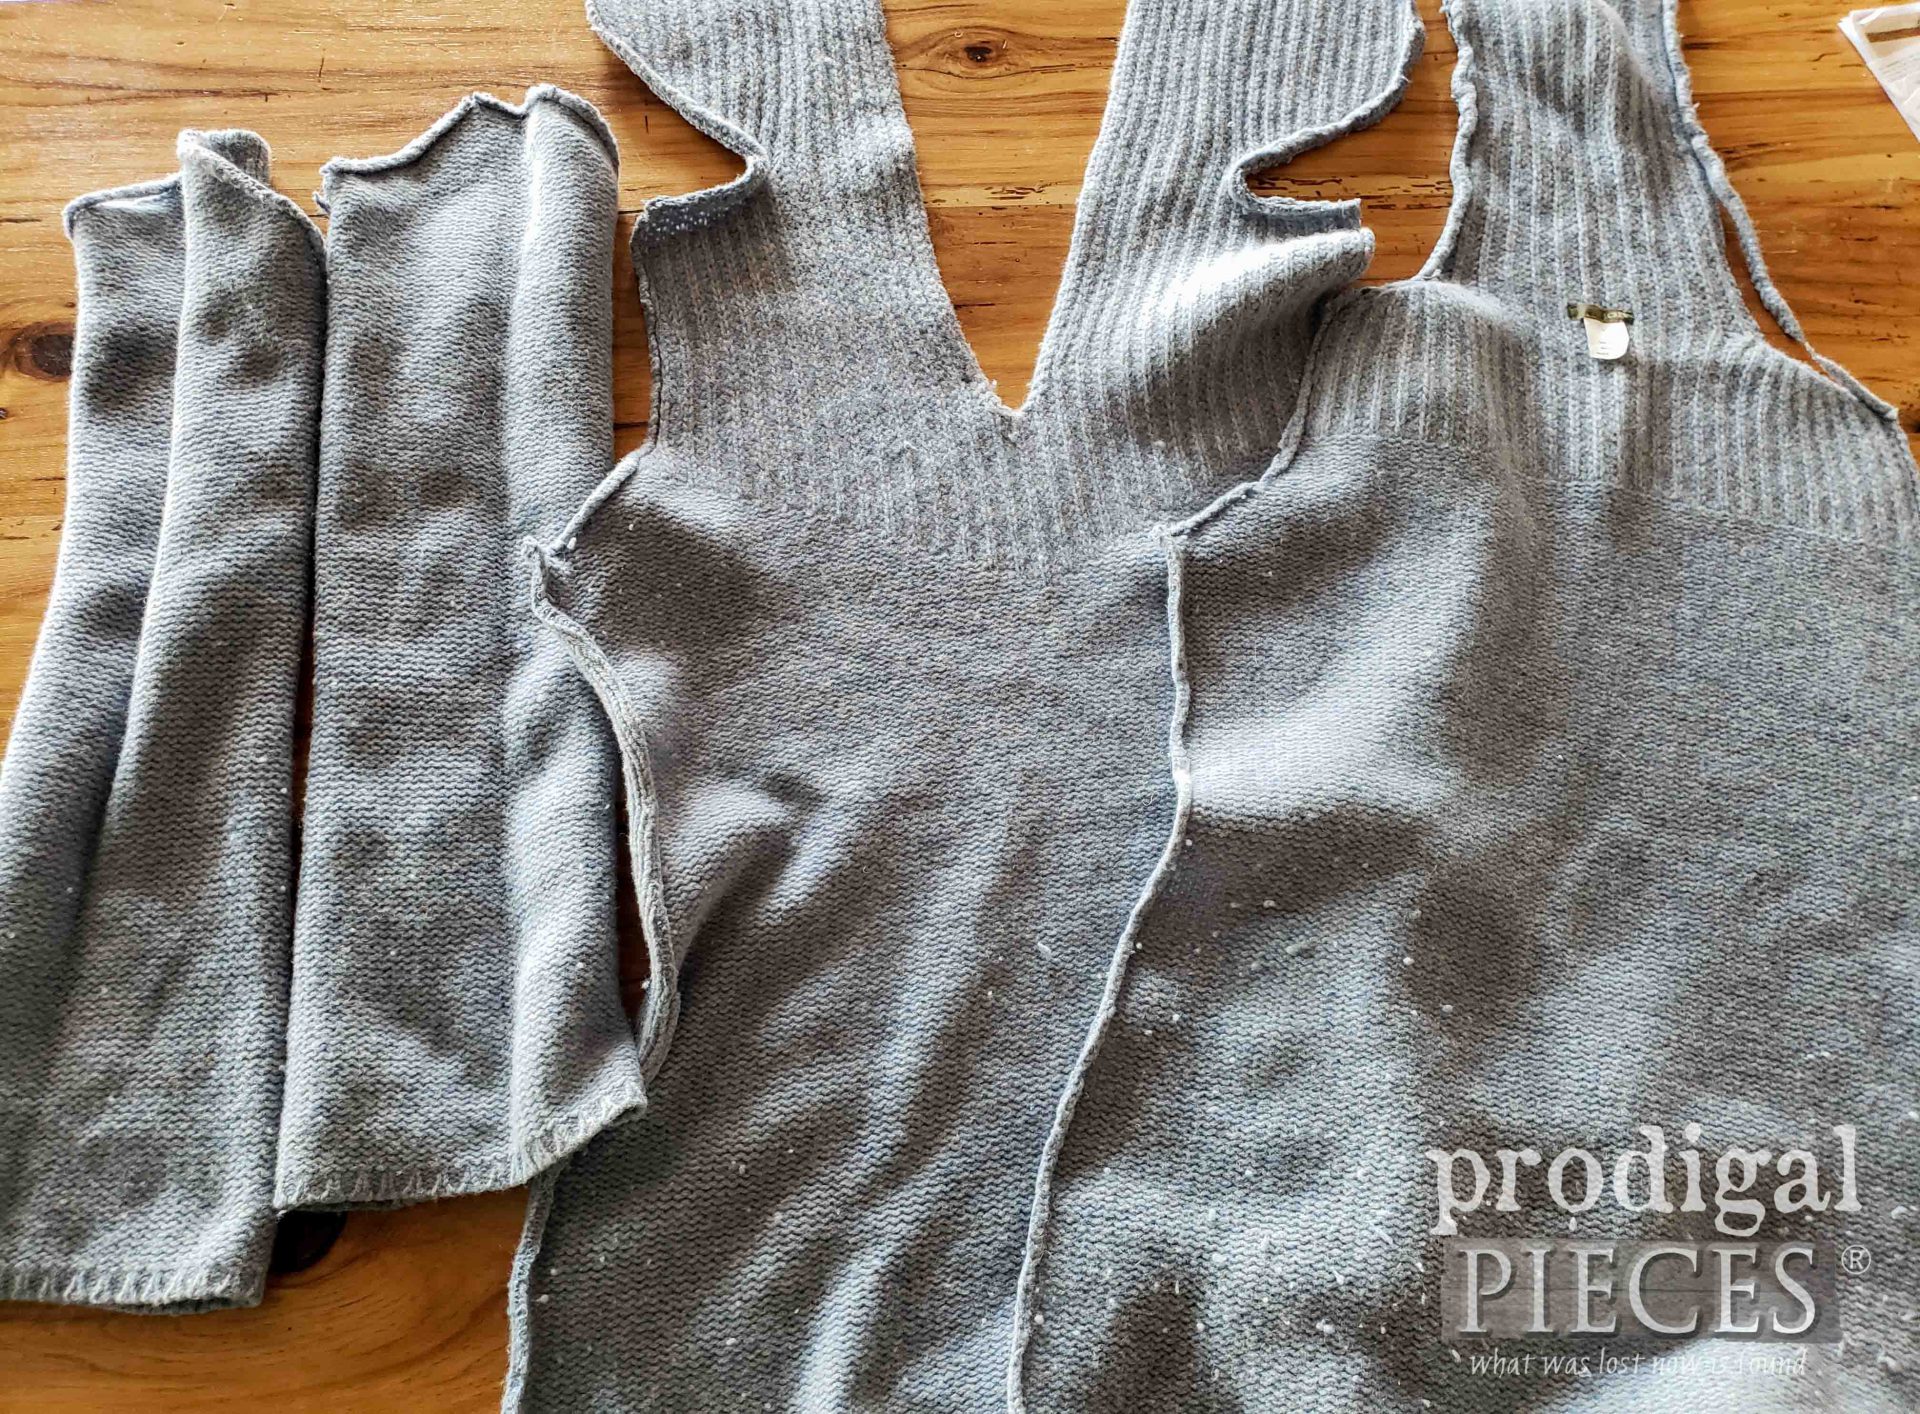 Separated Wool Sweater for Dryer Balls | prodigalpieces.com #prodigalpieces